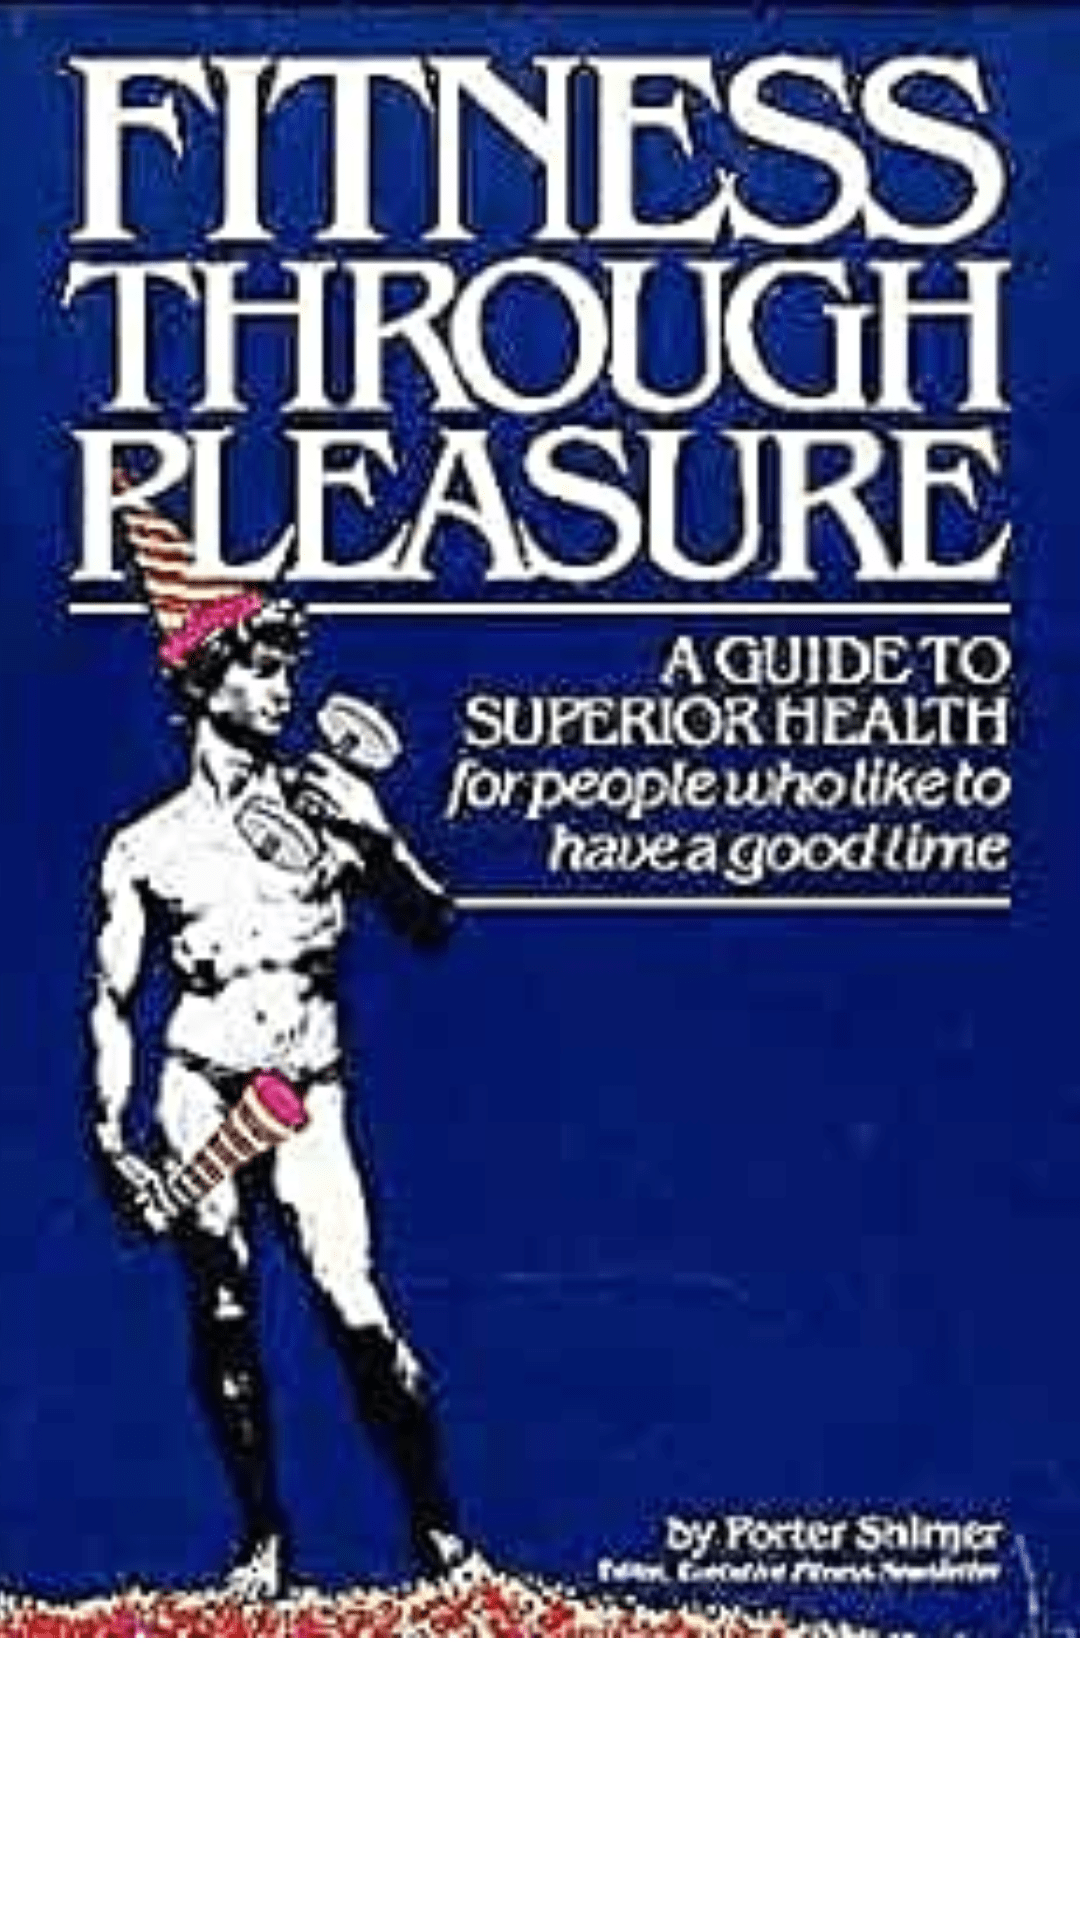 Fitness through pleasure: A guide to superior health for people who like to have a good time